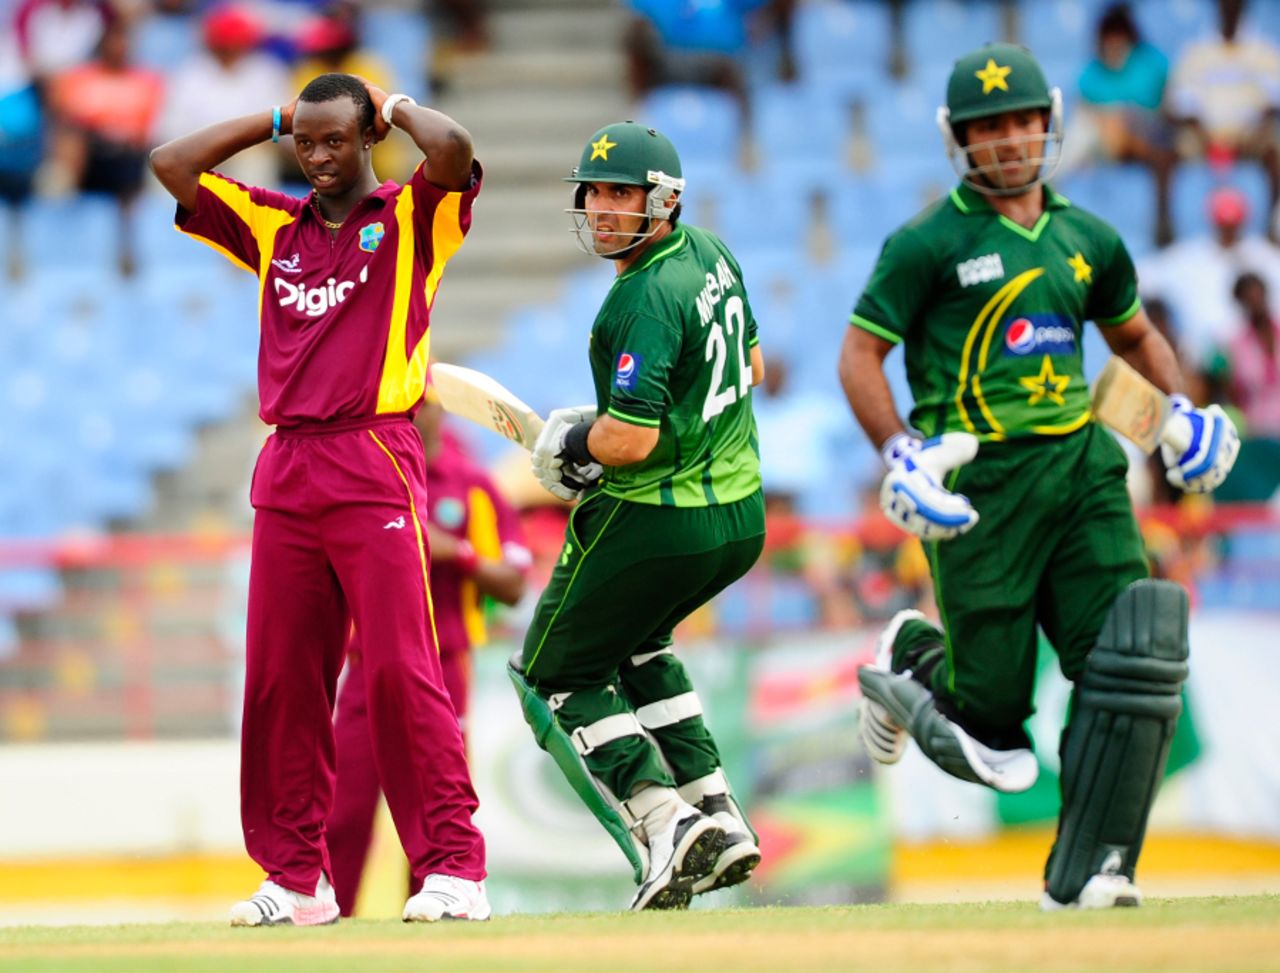 West Indies seamers' had a tough day in the field against Pakistan, West Indies v Pakistan, 1st ODI, St Lucia, April 23, 2011